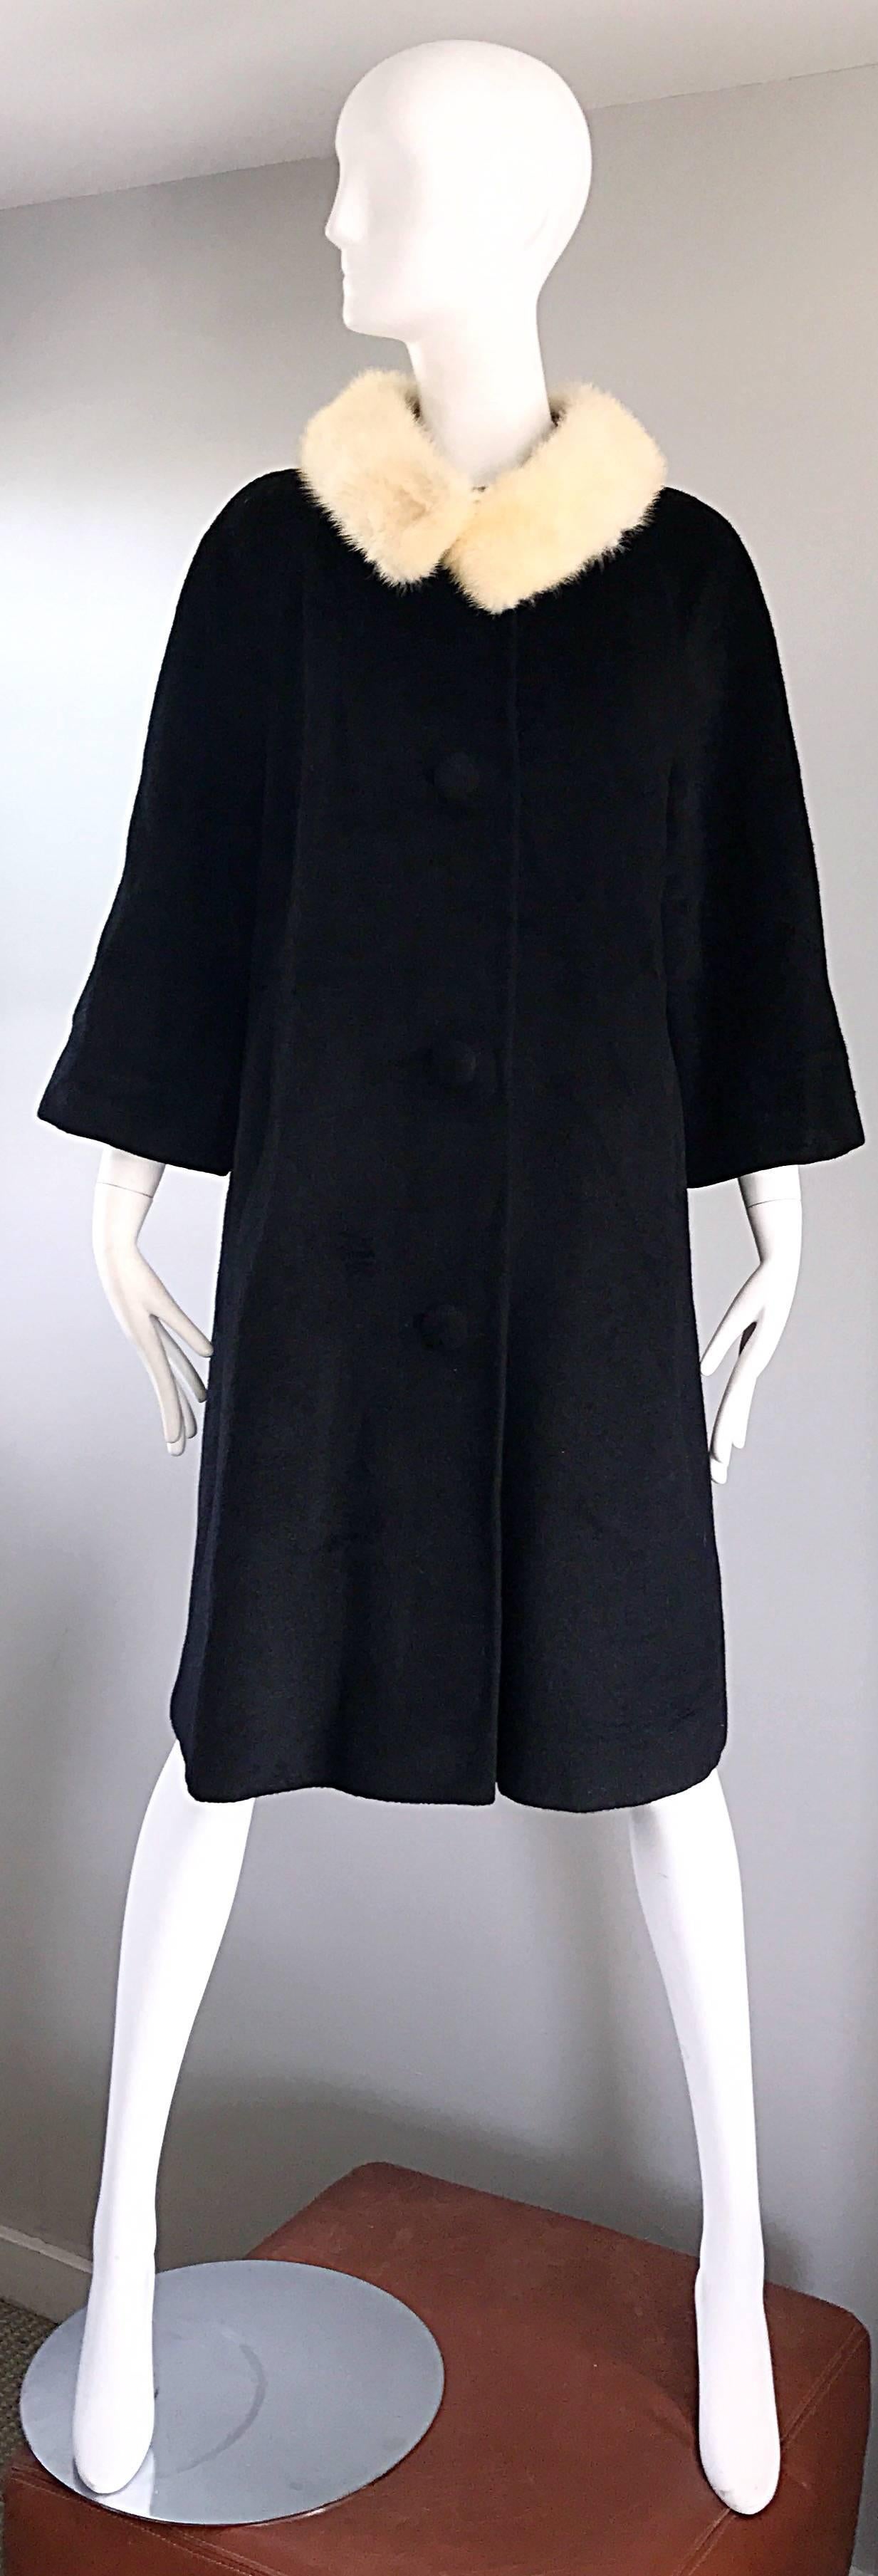 Chic 1960s 60s LILLI ANN Jackie O style black and ivory / white wool and mink fut swing coat! Luxurious soft black wool, with the signature Lilli Ann swing fit. Attached mink fur collar. Four buttons up the front of the jacket. Pockets at each side